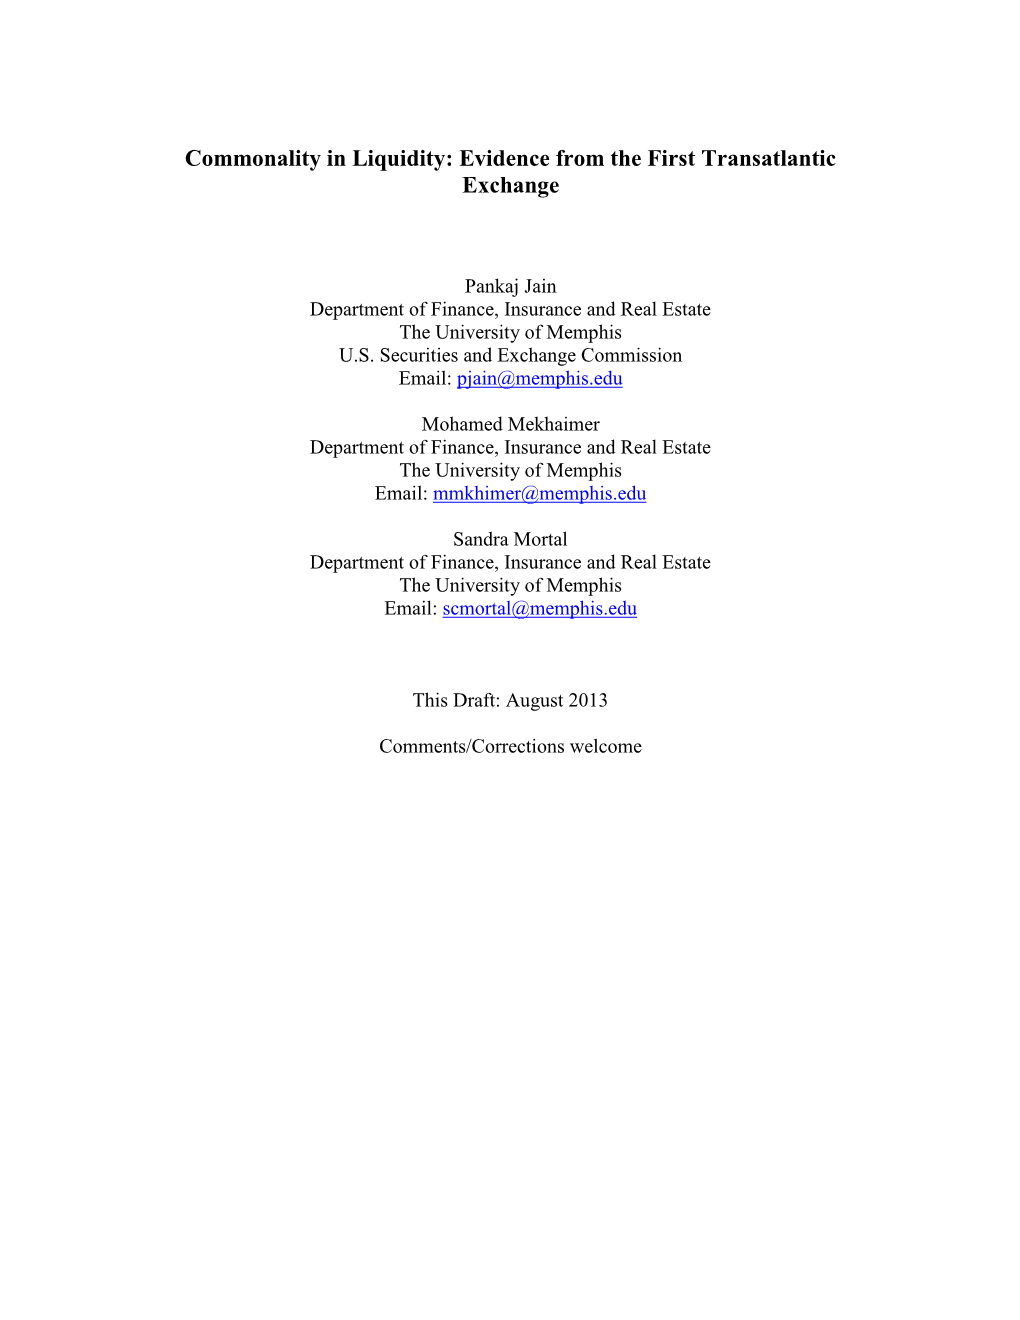 Commonality in Liquidity: Evidence from the First Transatlantic Exchange